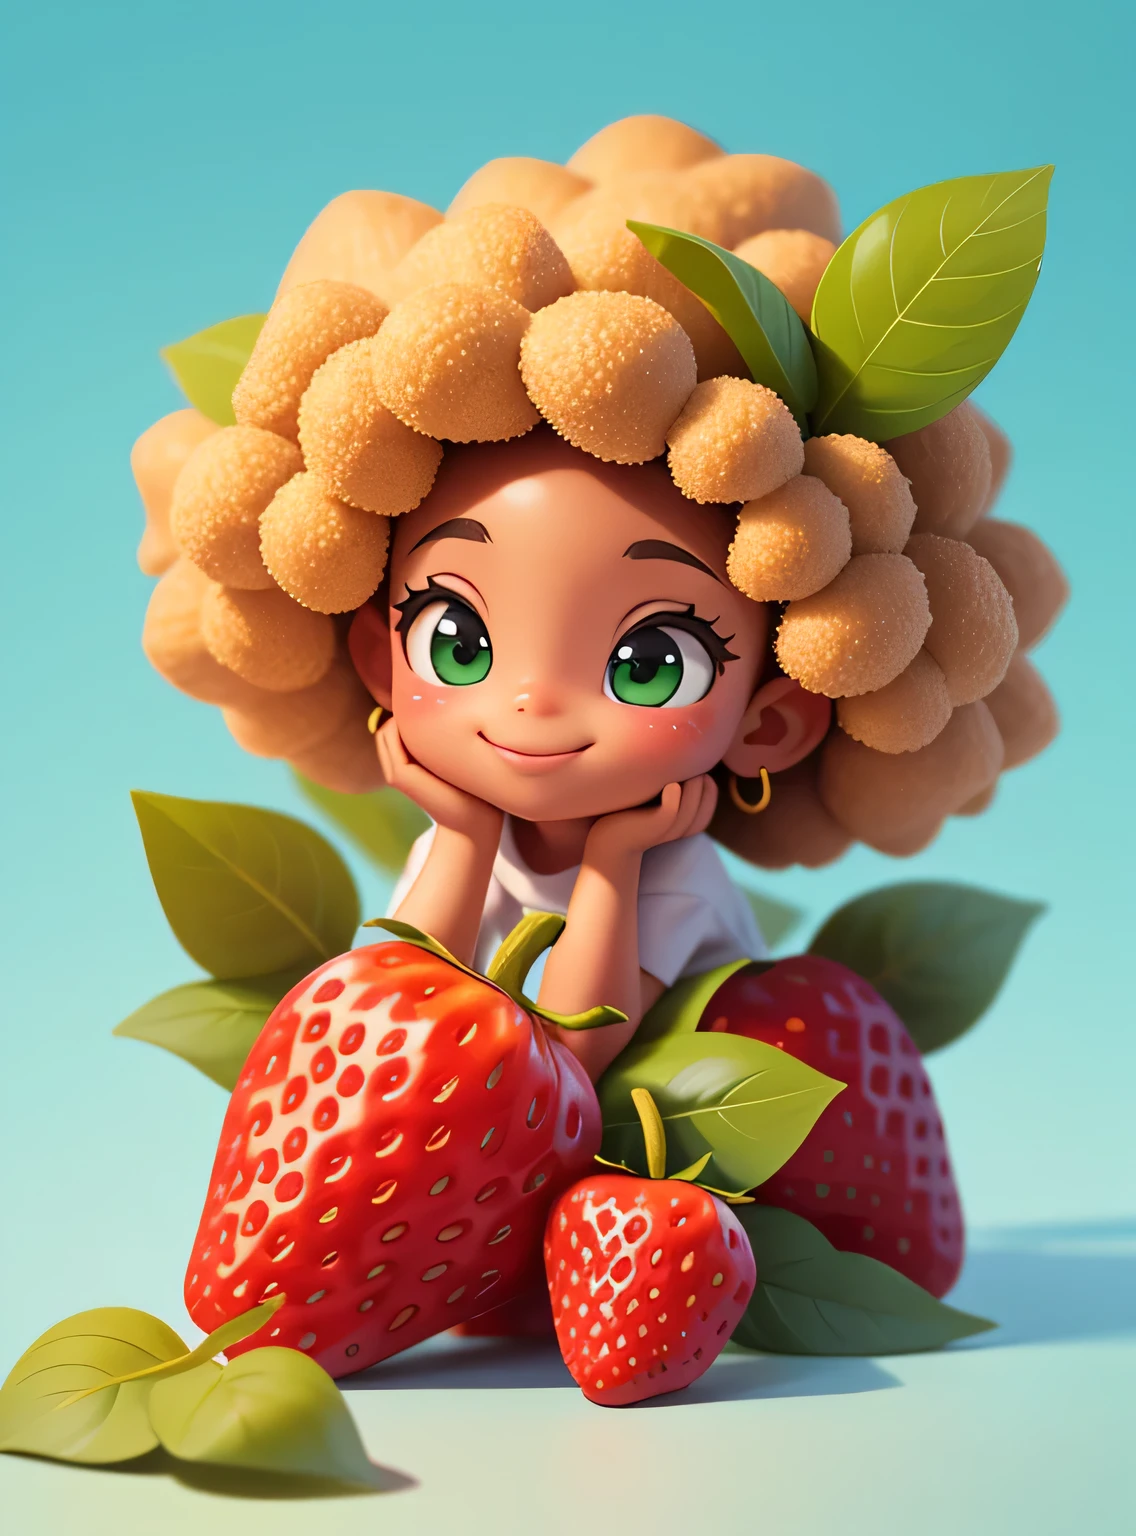 A small smiling afro strawberry with cute leaves and a friendly expression sticker :: Fruity and kind :: Red and green colors with cute expressions :: Adesivo 2D